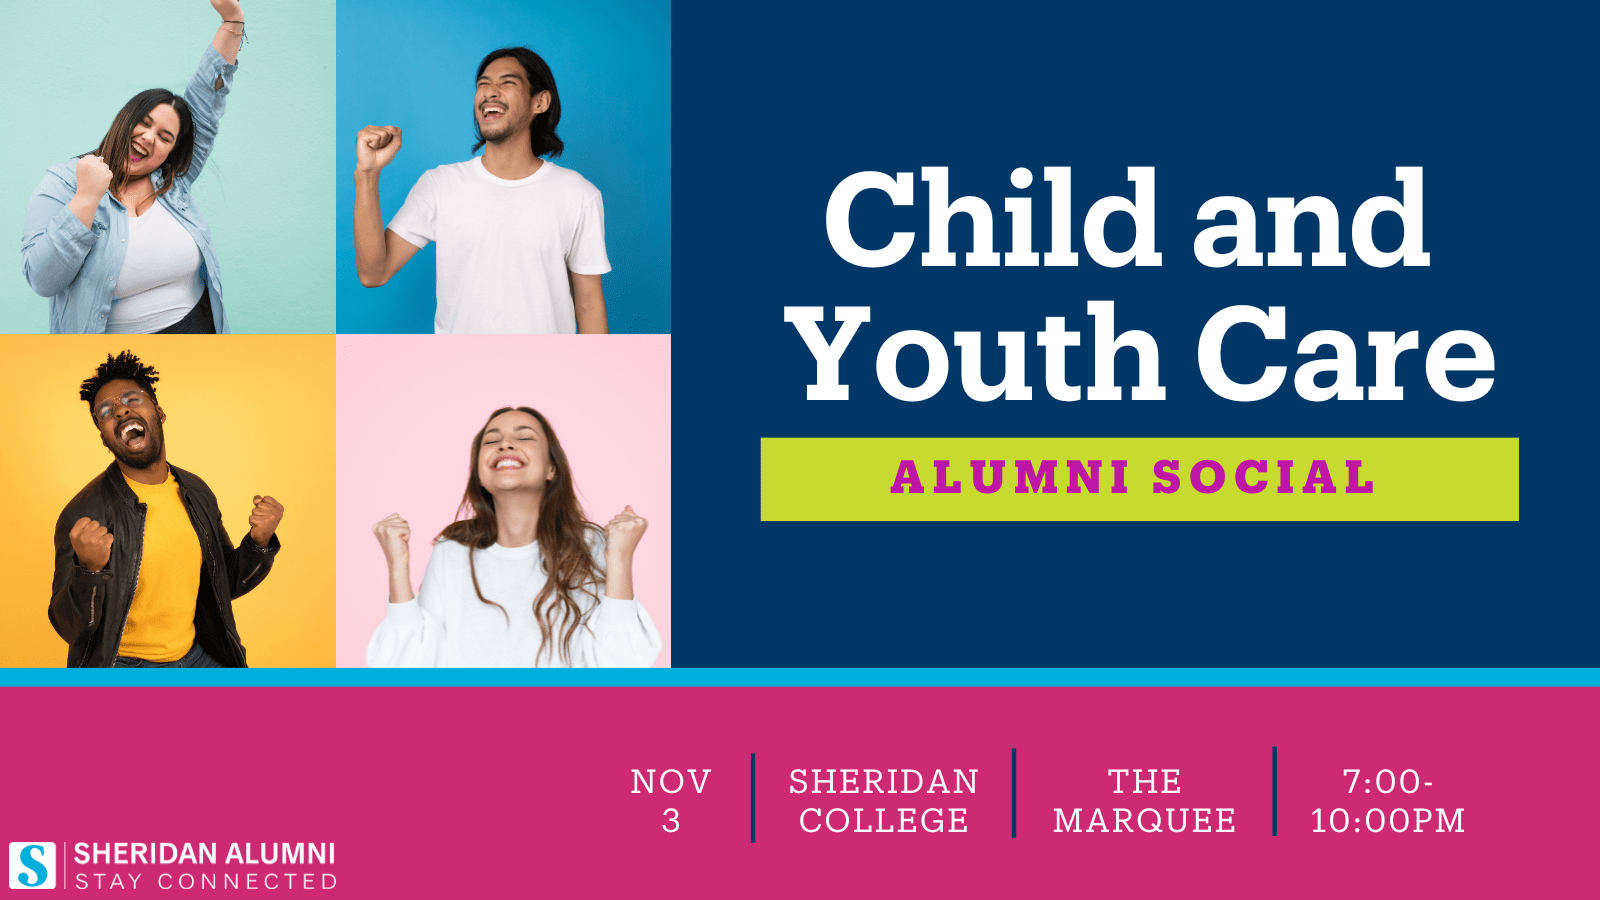 Child and Youth Care Alumni Social | Nov 3 | Sheridan College | The Marquee | 7-10 p.m.